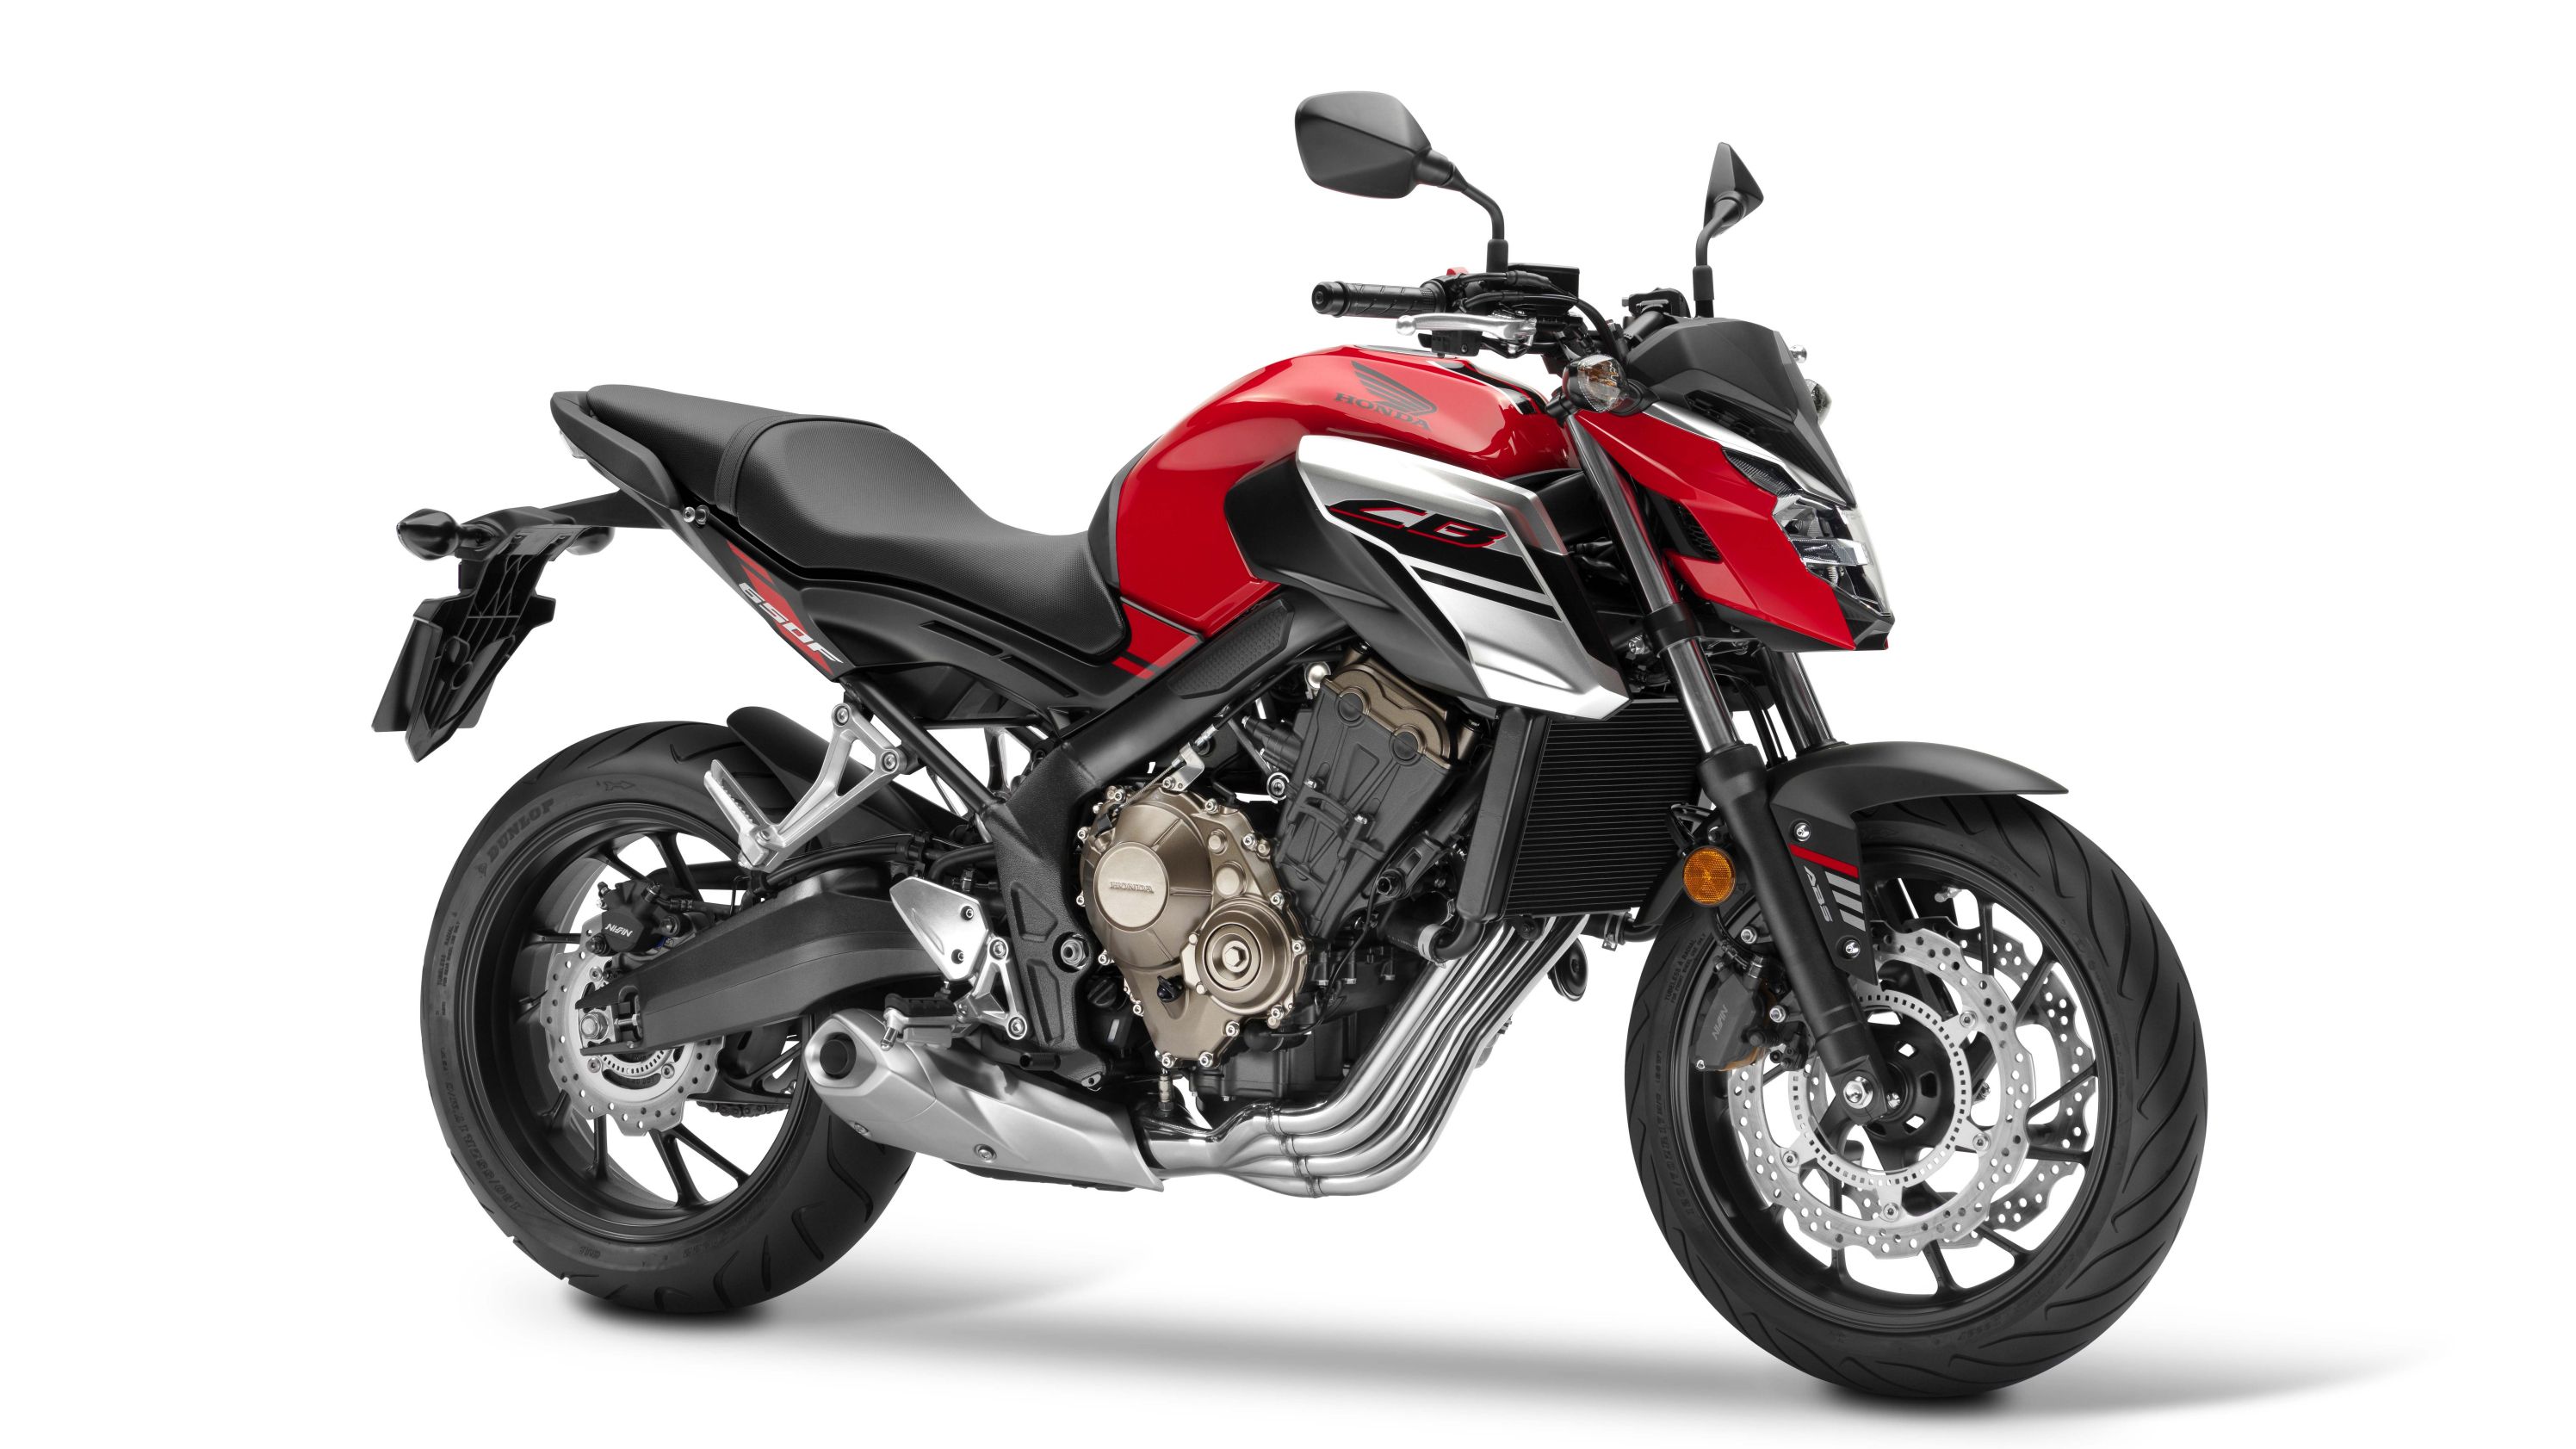 2018 Honda CB650F: How Does It Stack Up With The FZ-07 And SV650?